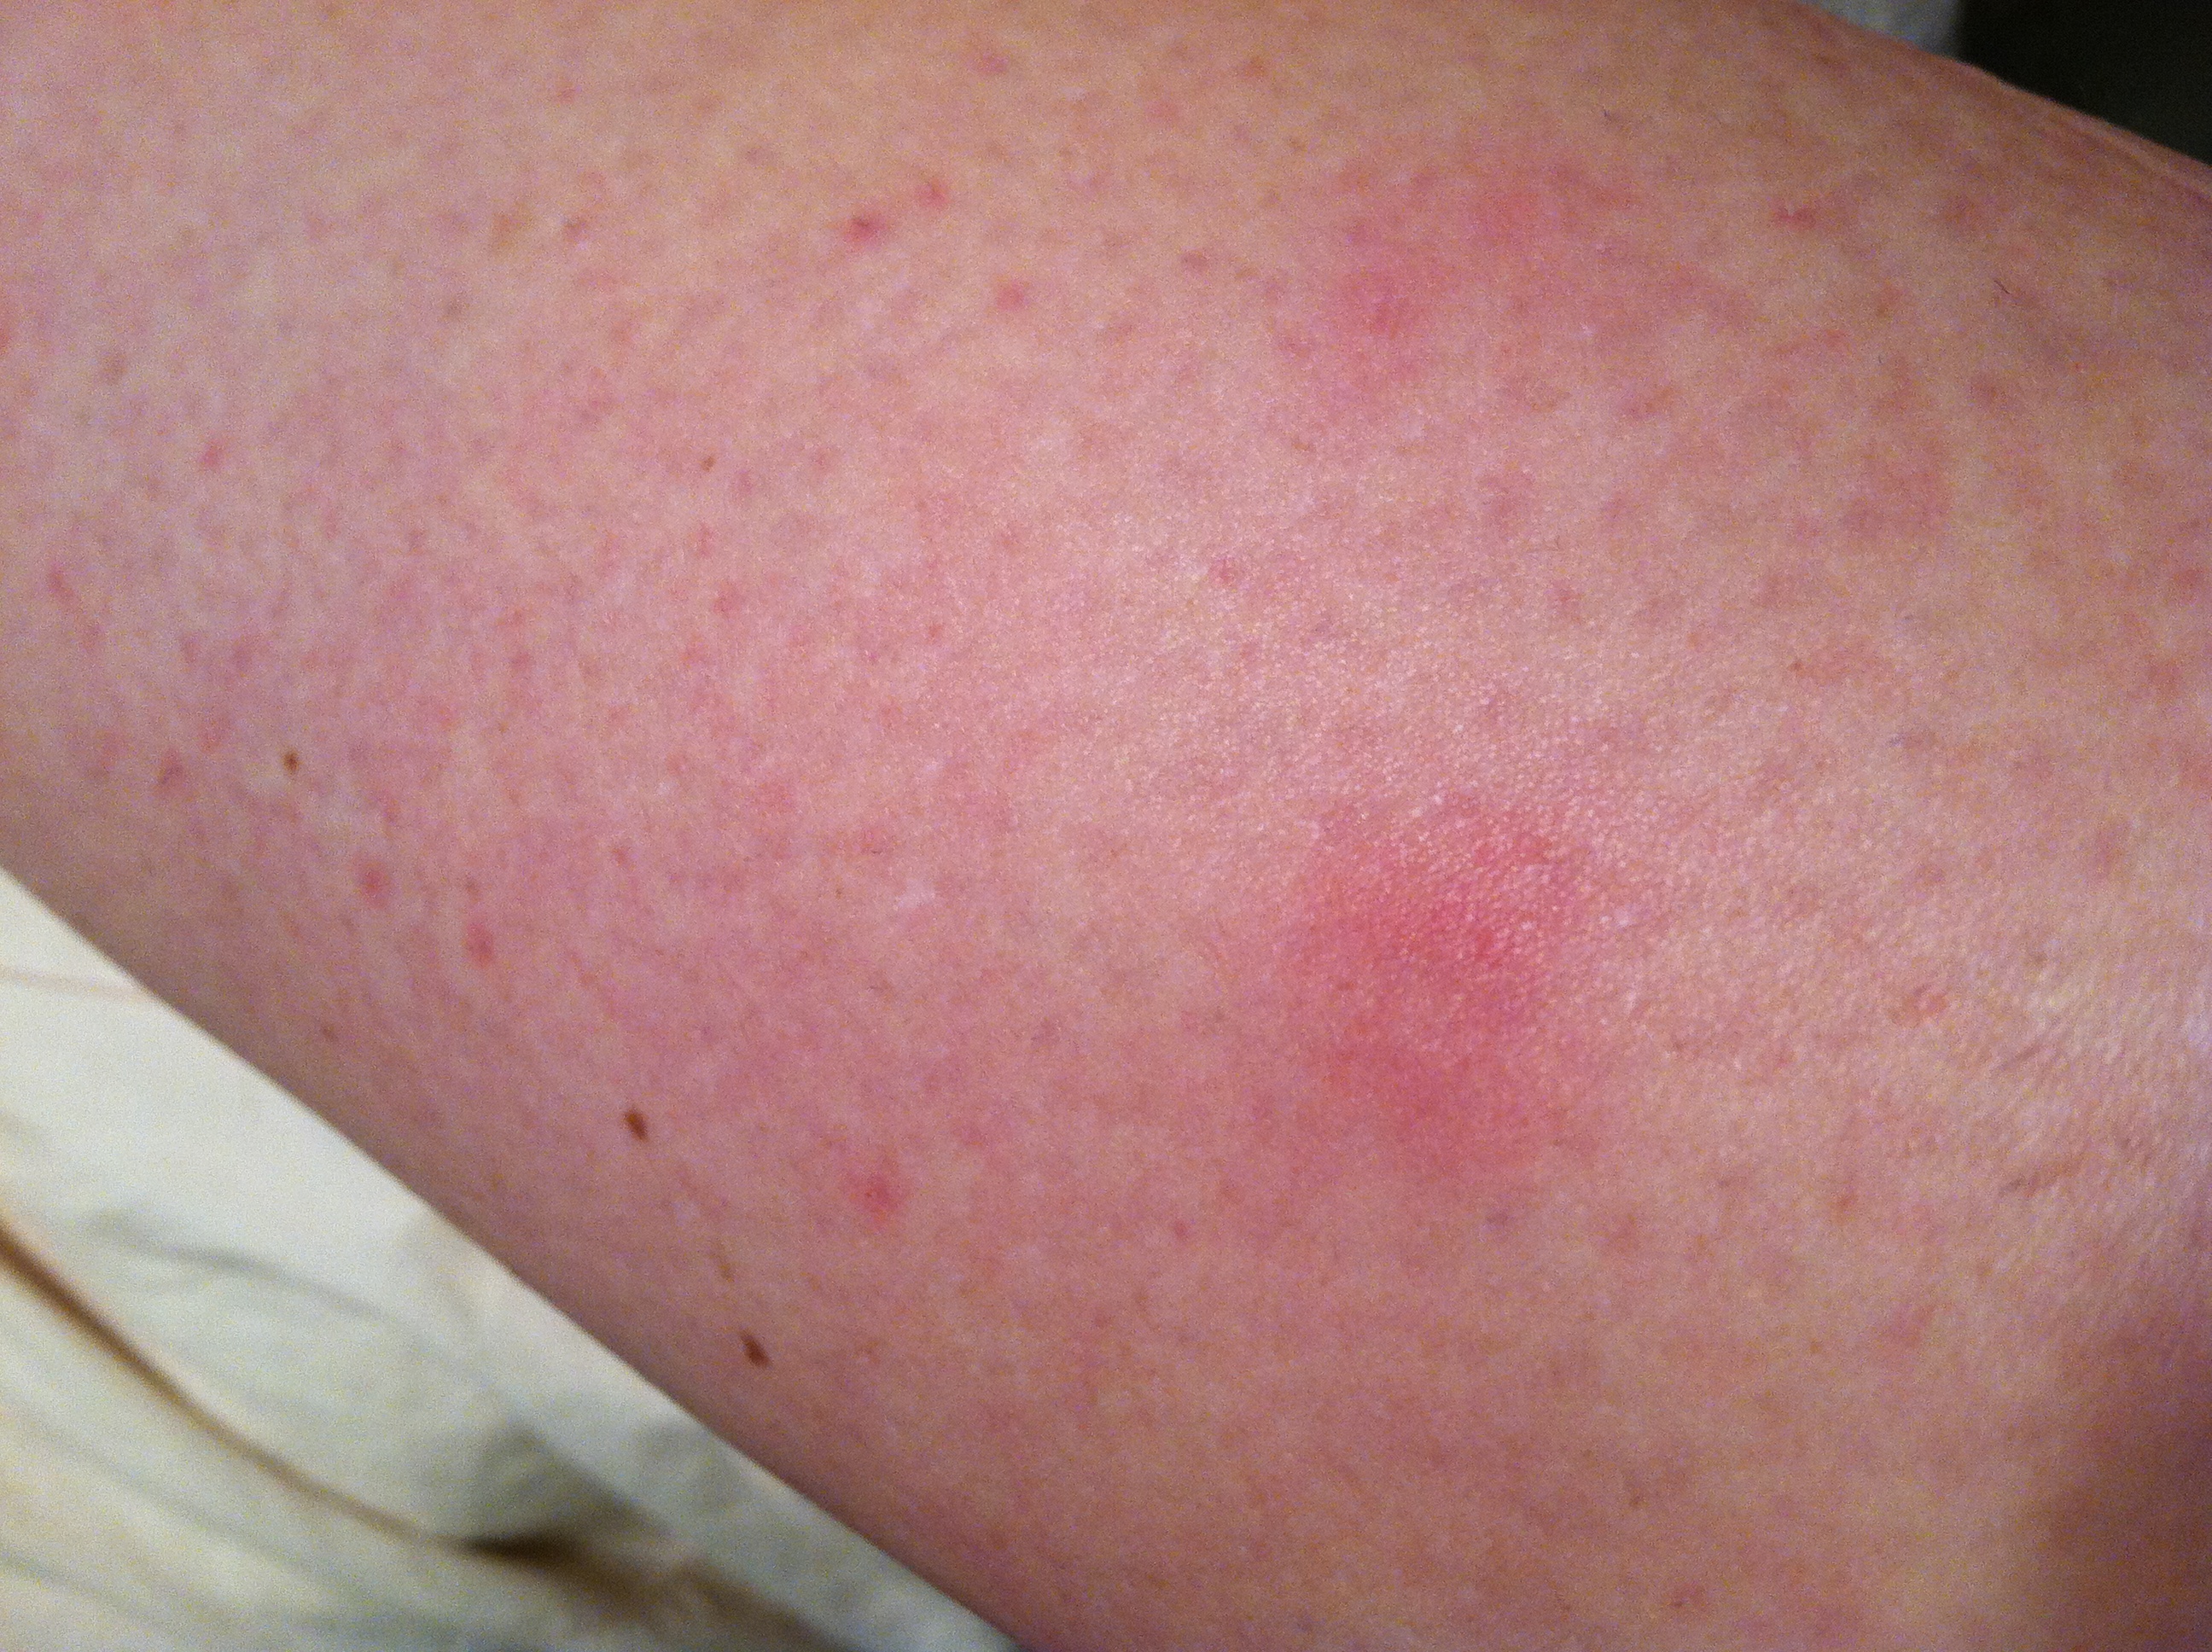 tiny pinpoint red spot on exposed skin